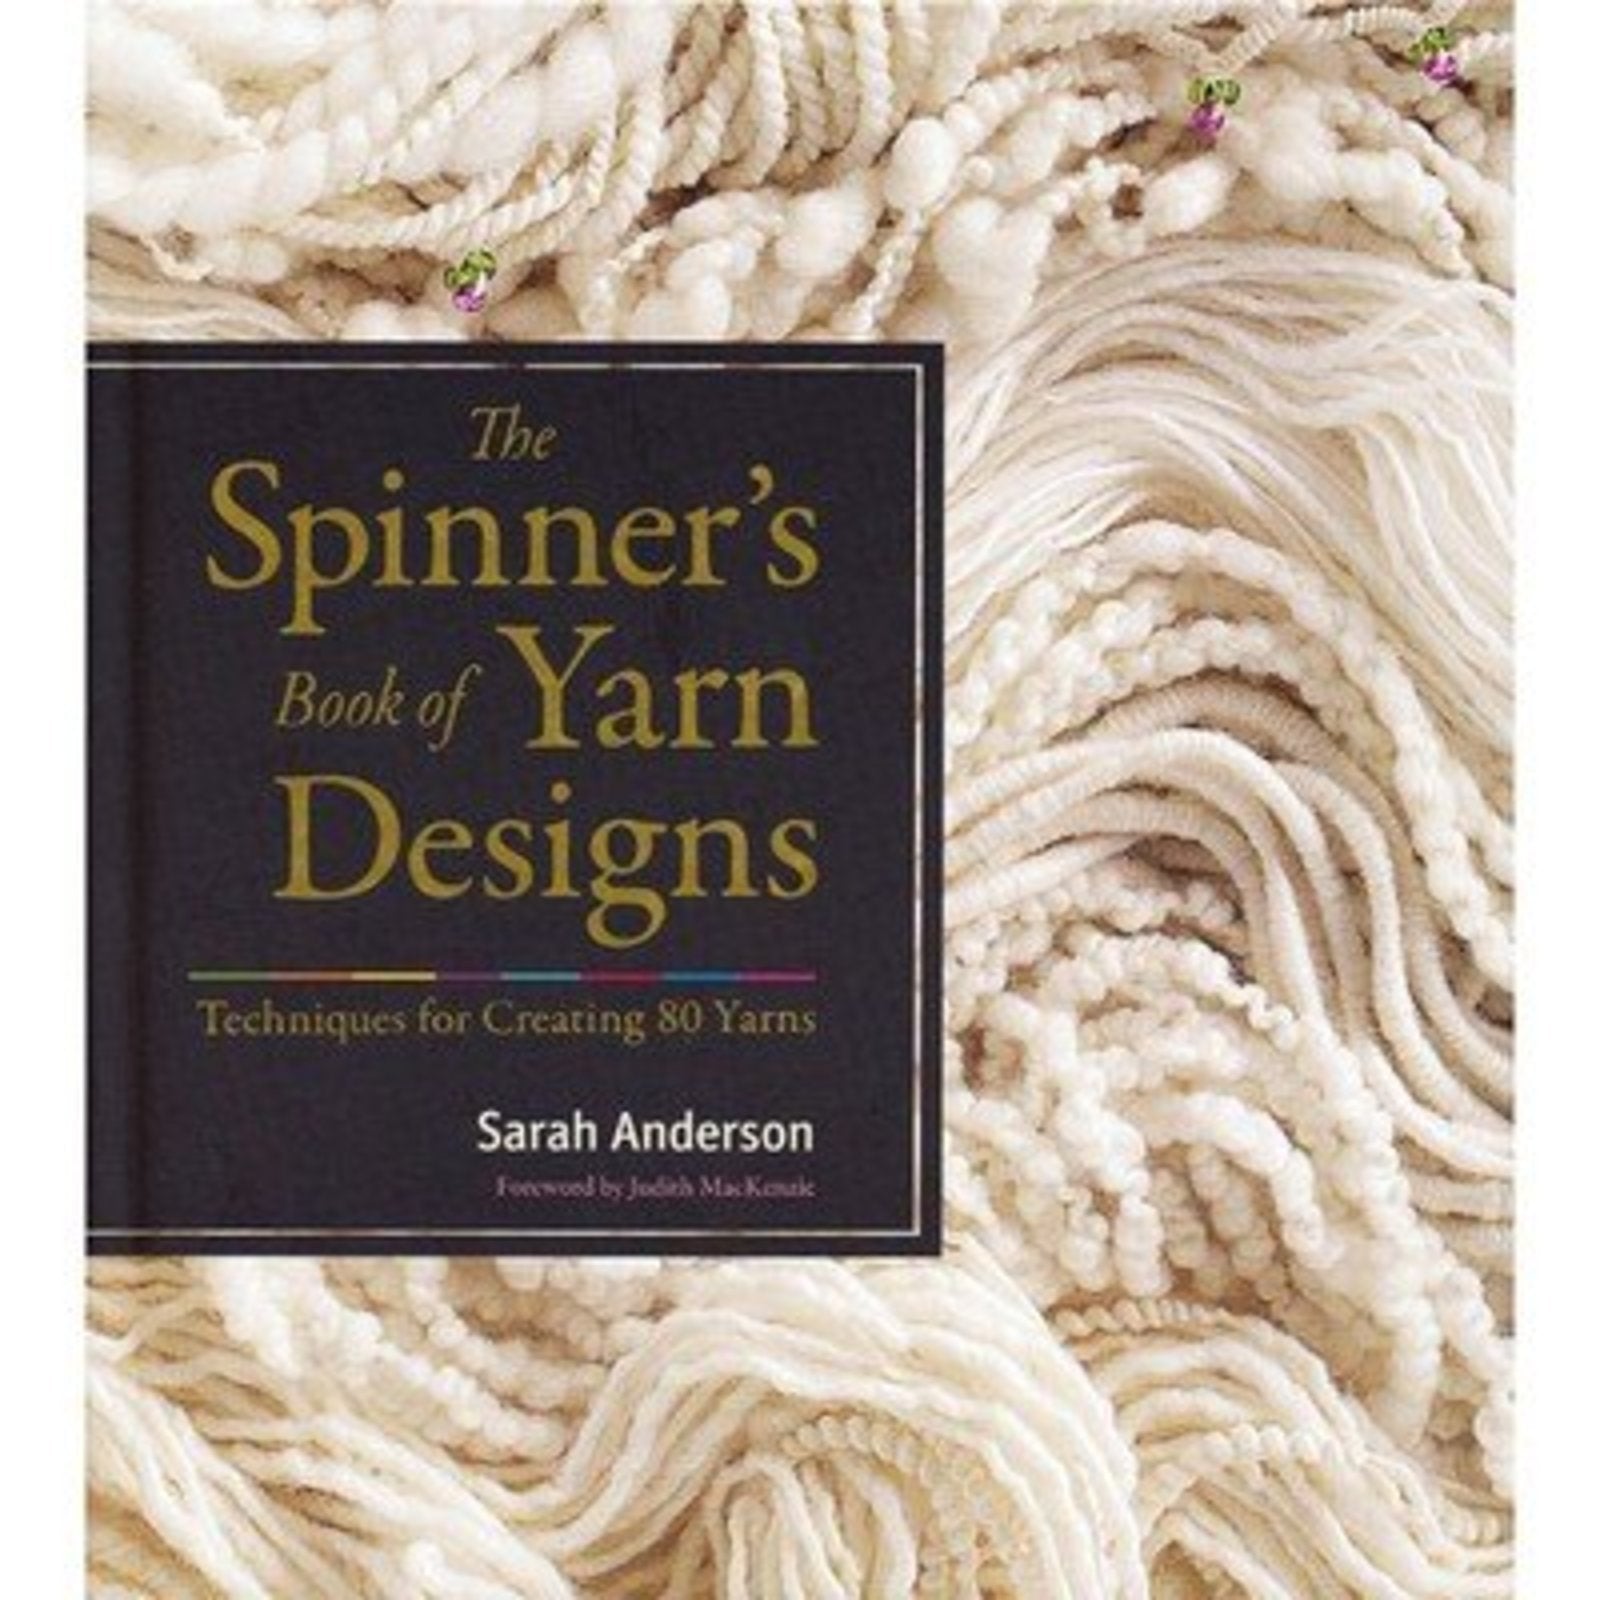 The Spinner's Book of Yarn Designs - Sarah Andreson